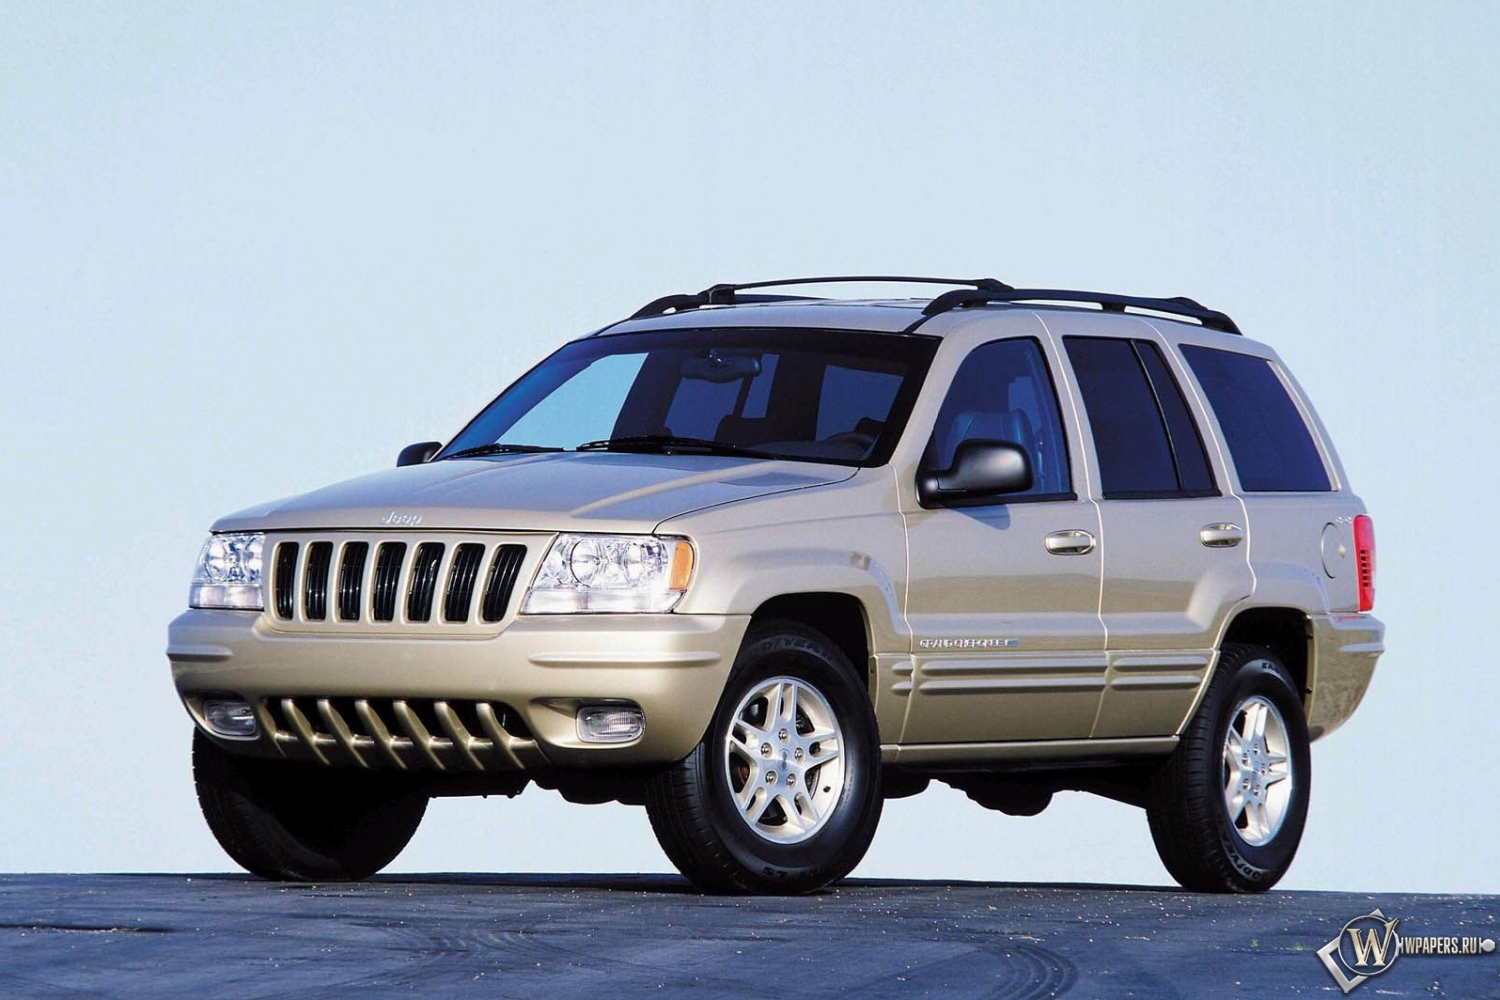 1992 Jeep grand cherokee review #1